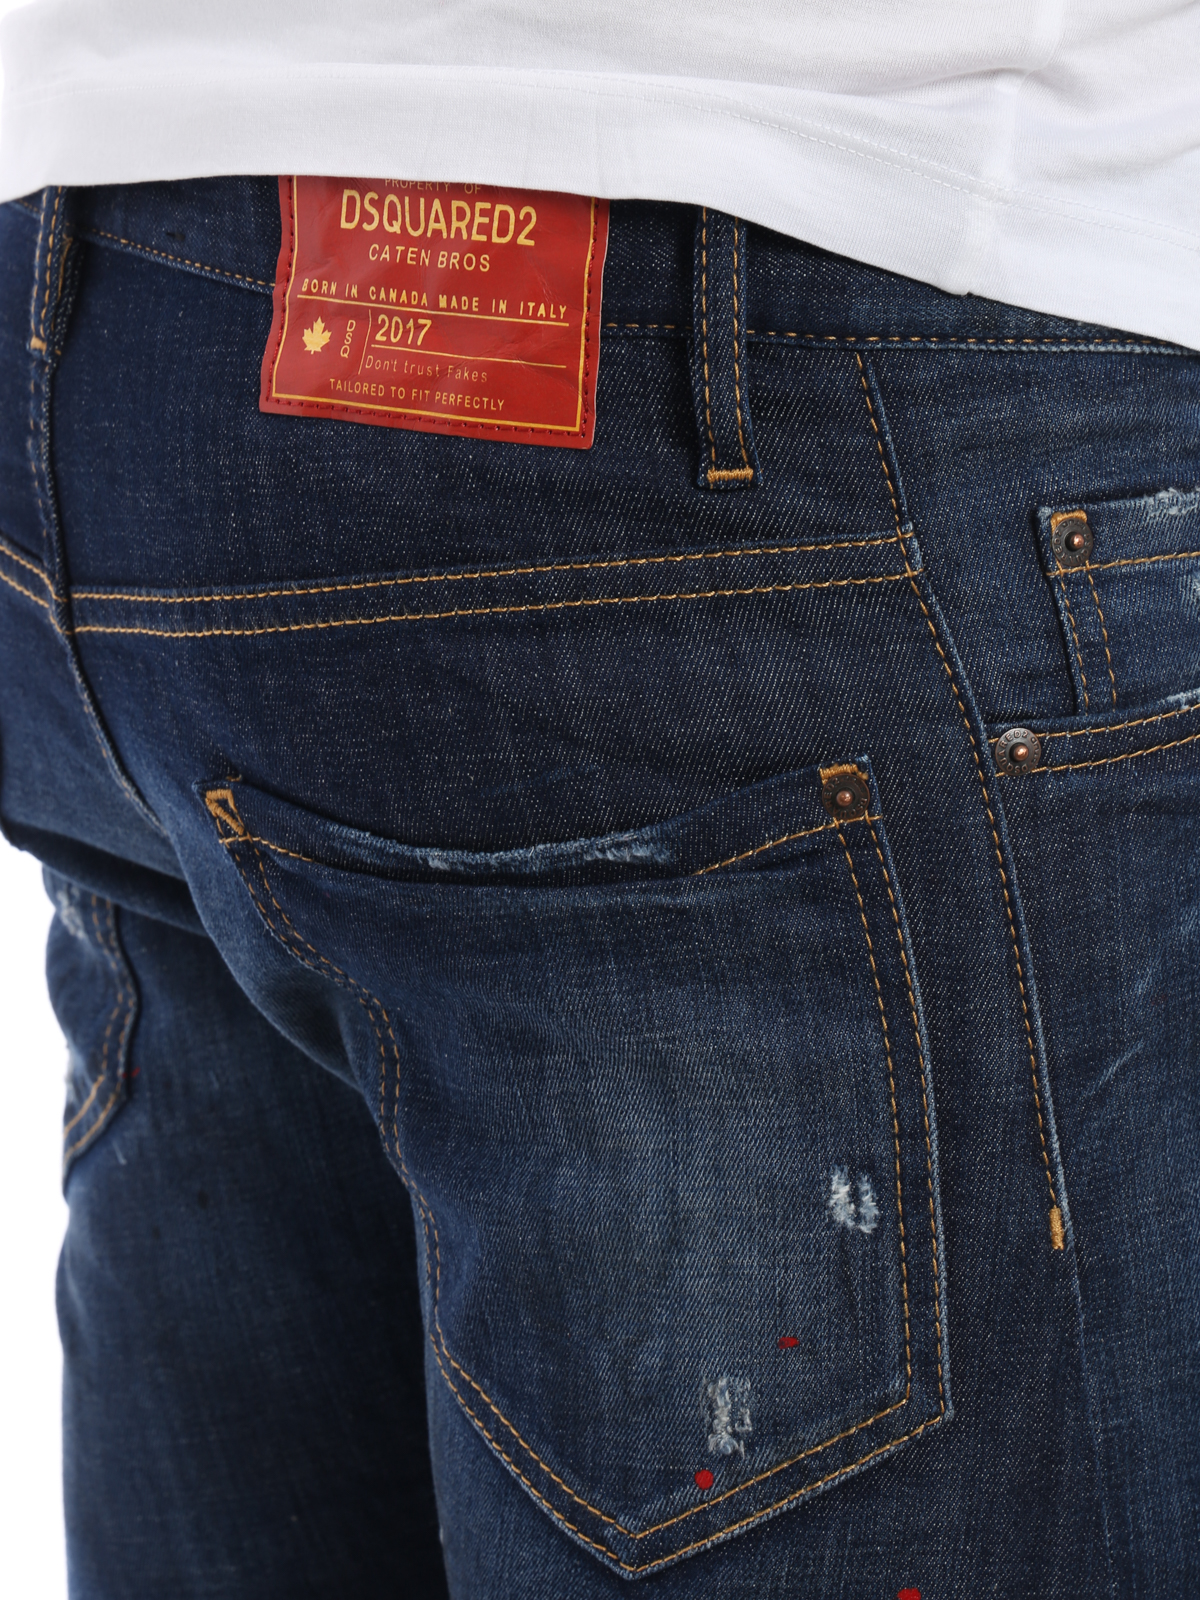 dsquared caten bros jeans